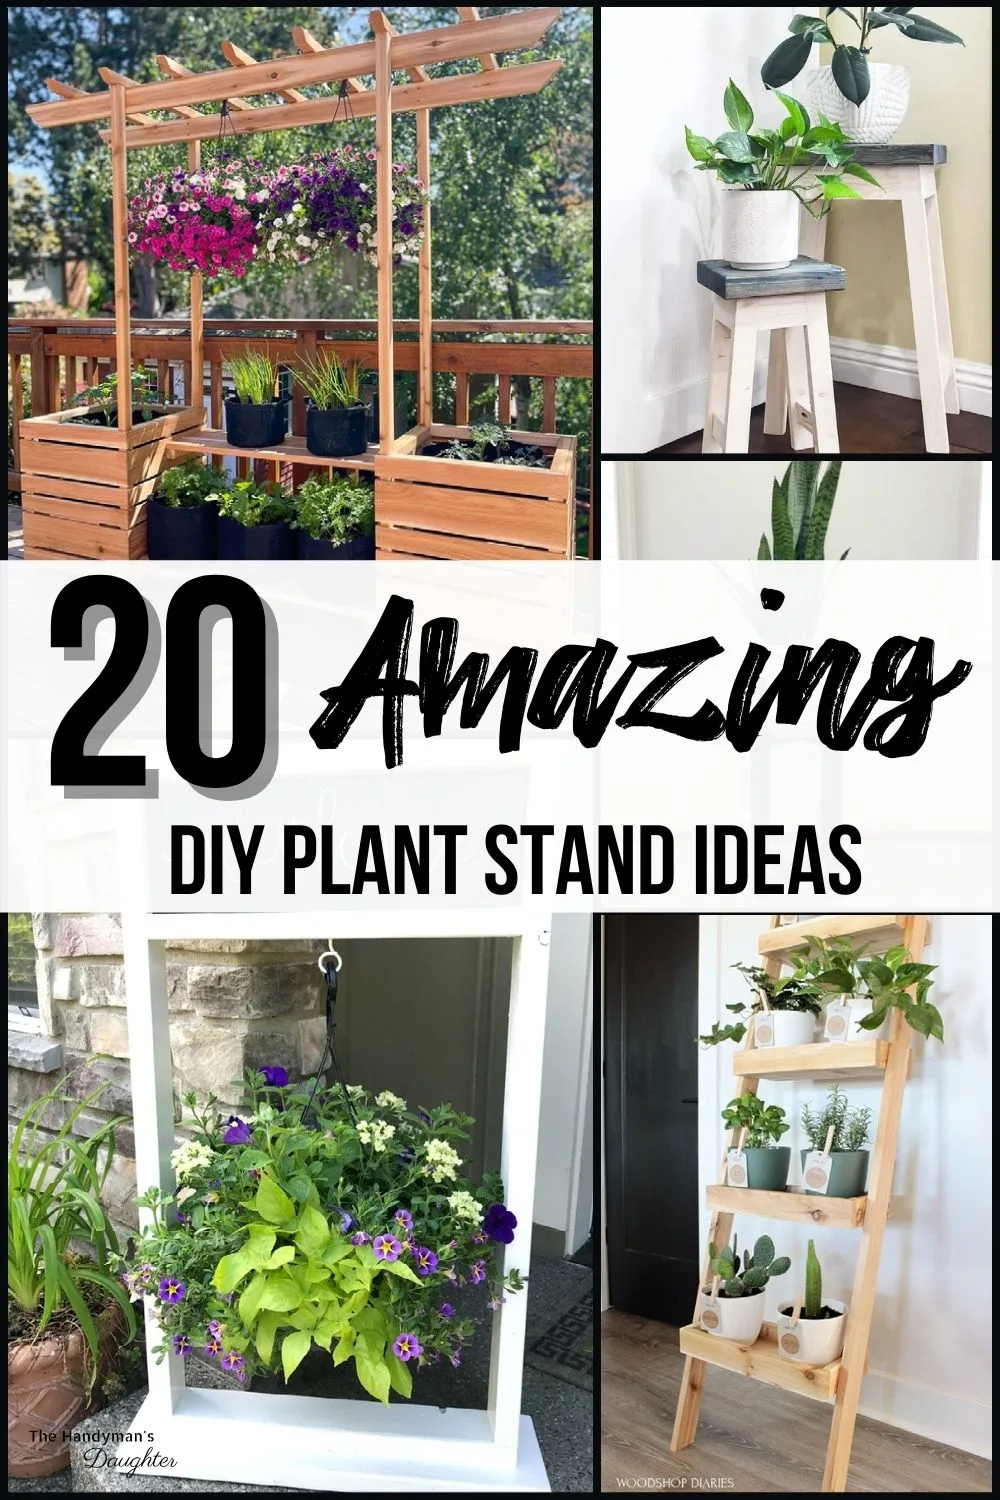 20 Amazing Diy Plant Stand Ideas For, Diy Outdoor Shelves For Plants